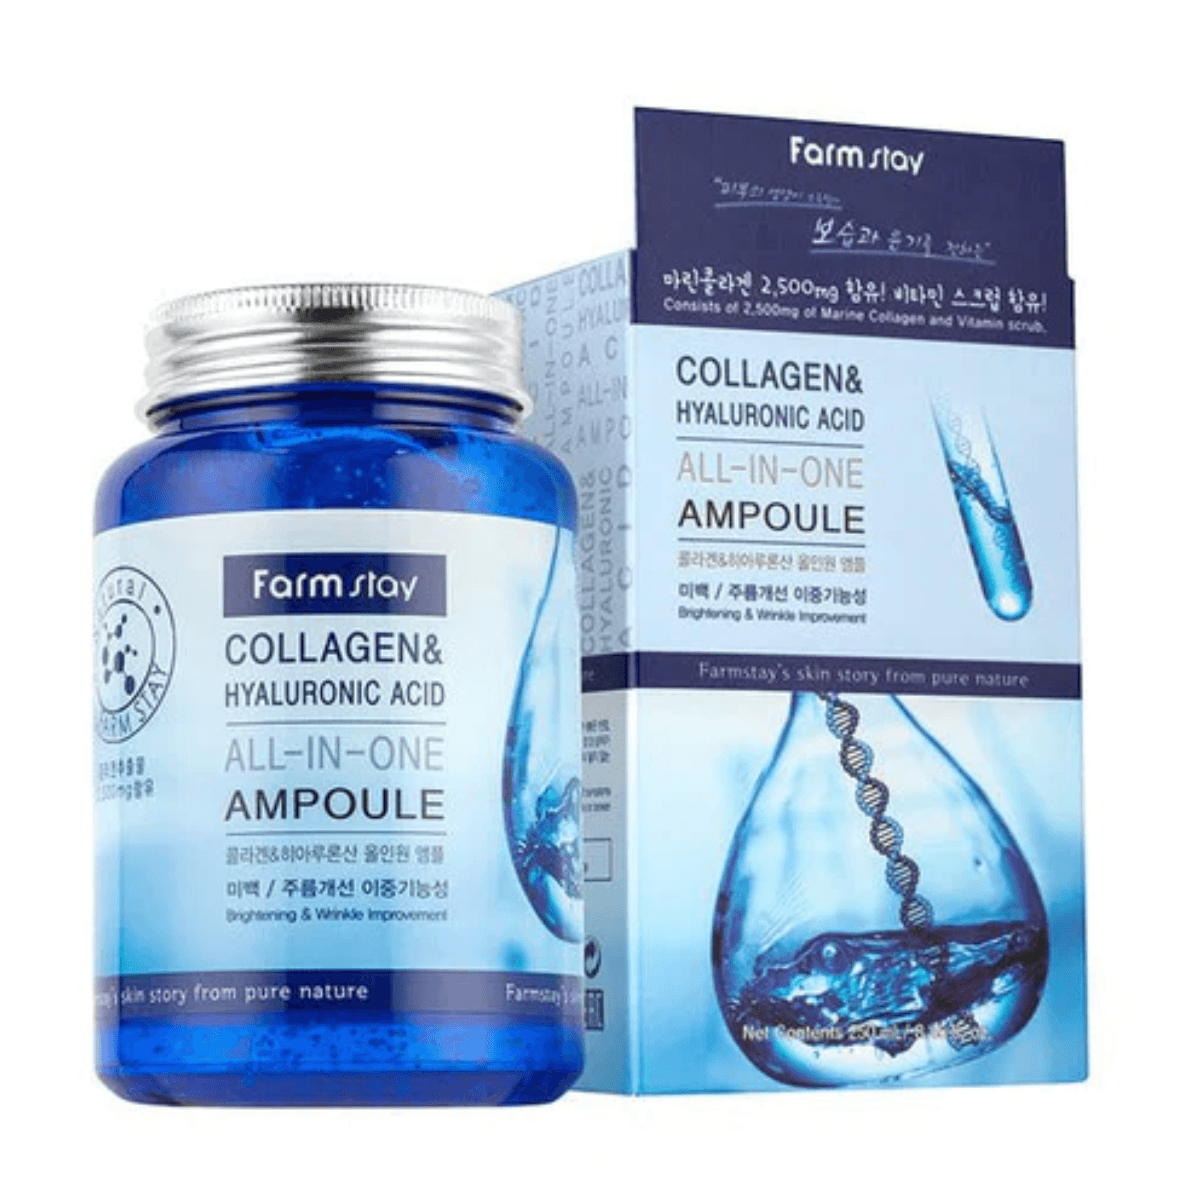 Farmstay Collagen & Hyaluronic Acid All-in-One Ampoule: Marine collagen formula for hydrated, bright, and elastic skin.